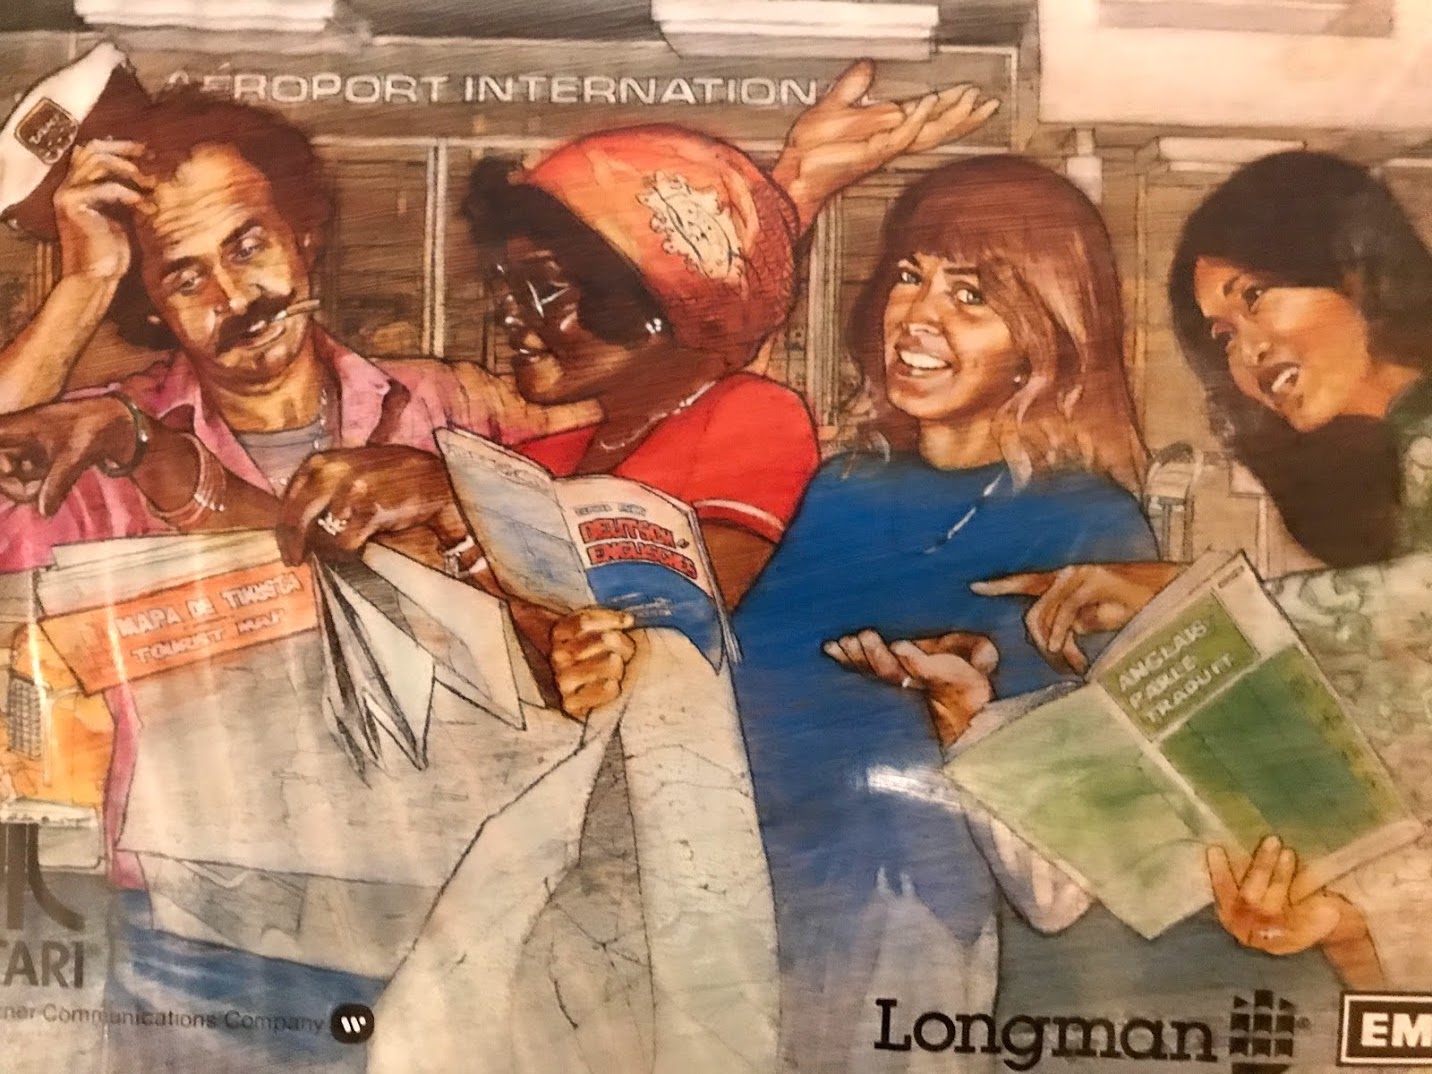 The cover art of Conversational German, featuring a number of tourists holding guides and maps in various languages